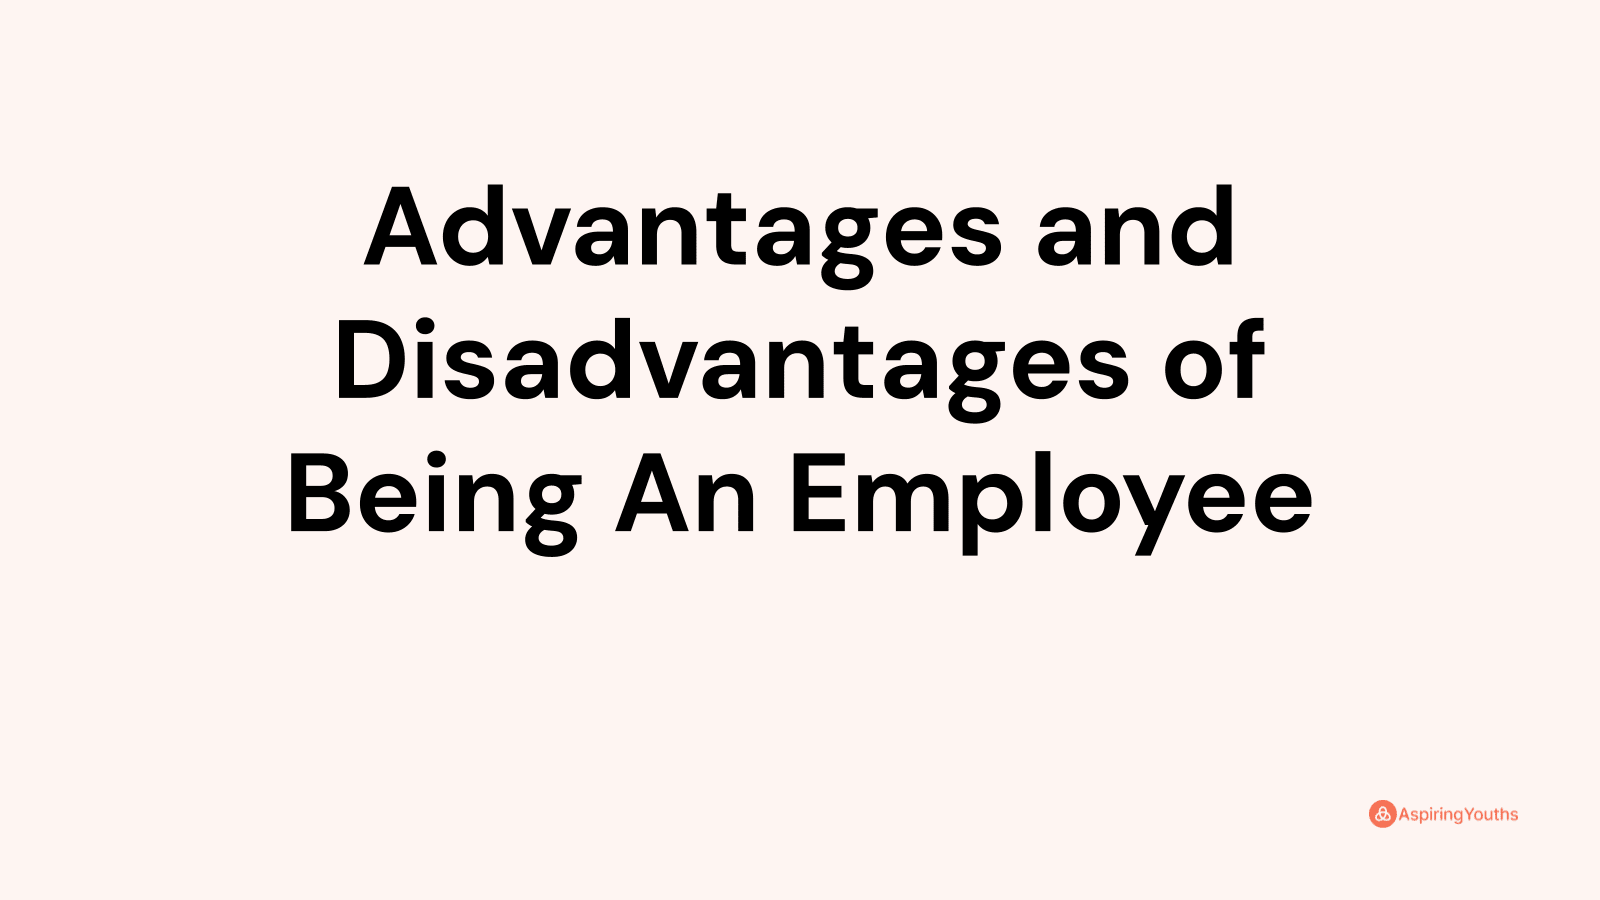 Advantages and disadvantages of Being An Employee